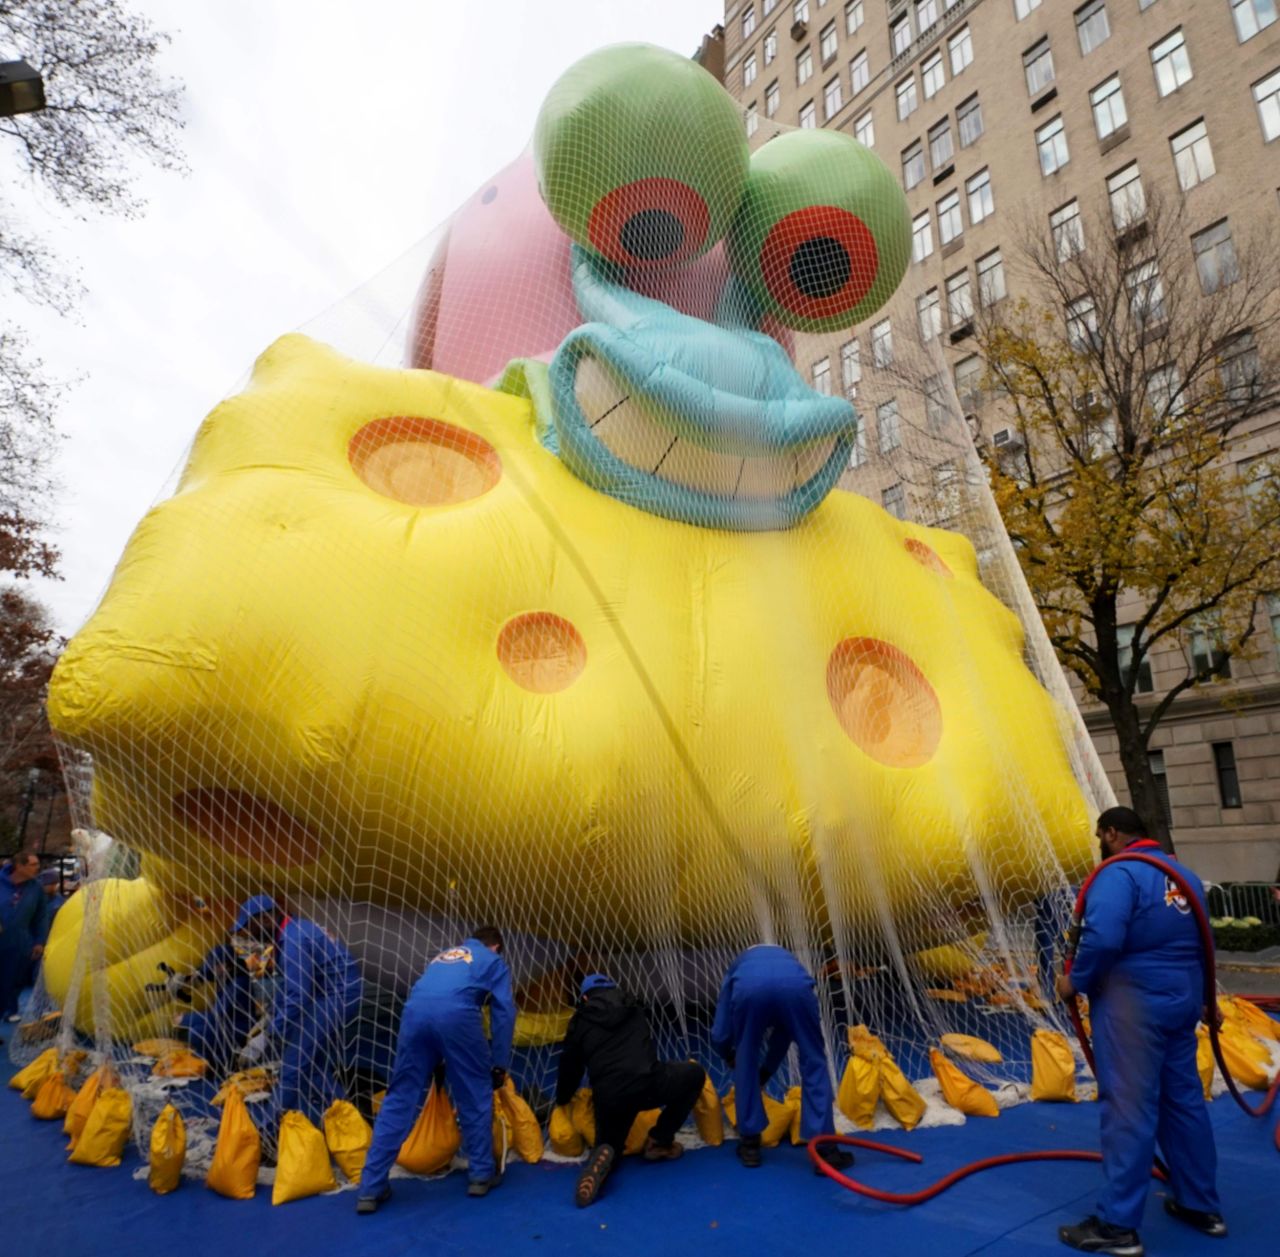 A "SpongeBob SquarePants" balloon is kept under a net after being inflated.